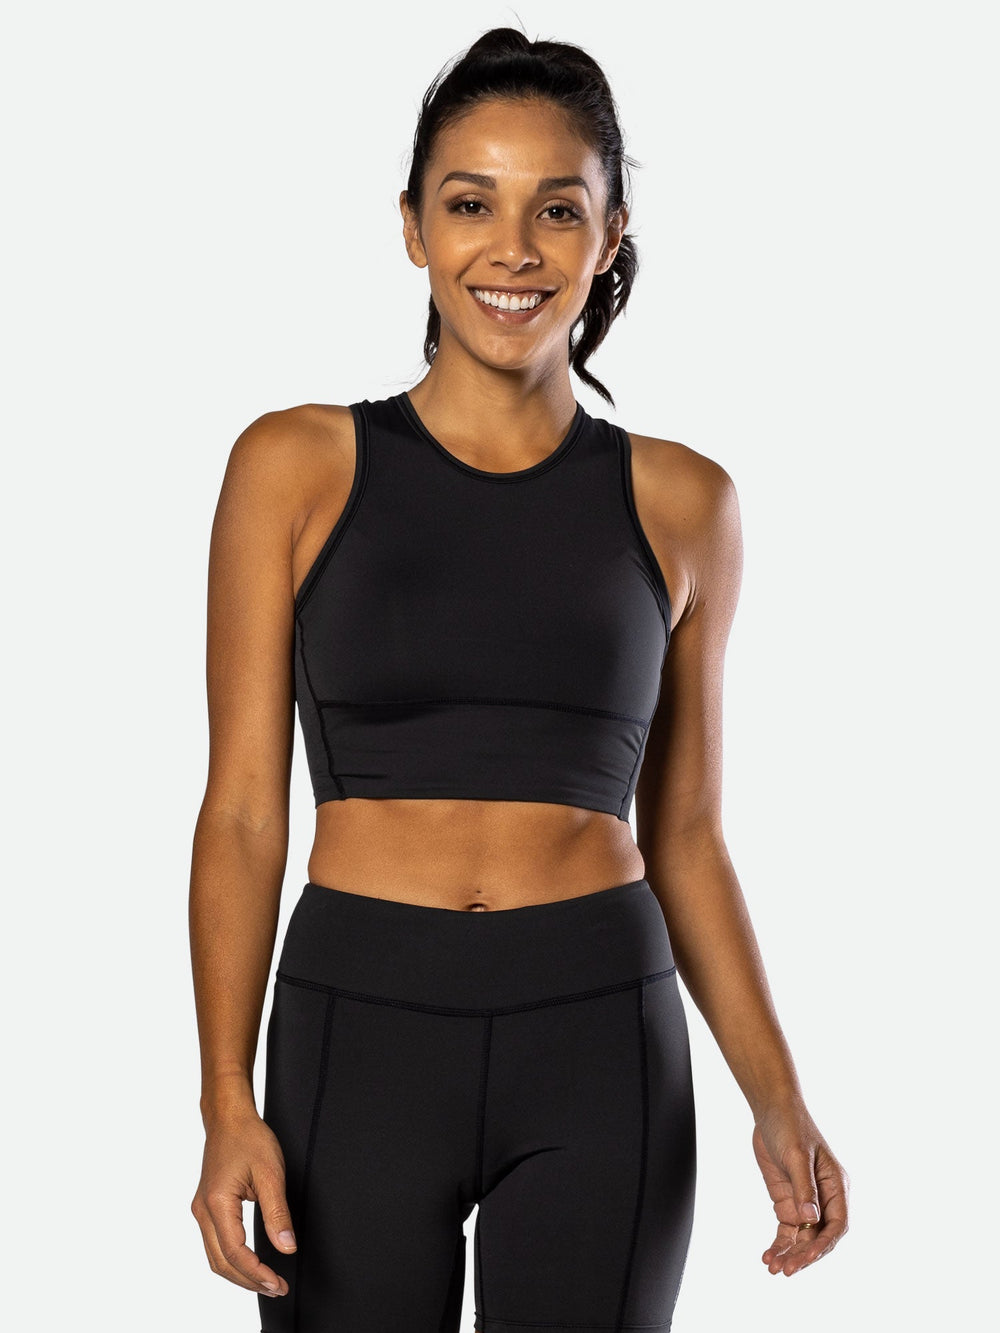 Lole Silhouette, Workout Tops For Women, Tank Top with Built in Bra - Love  & Sweat